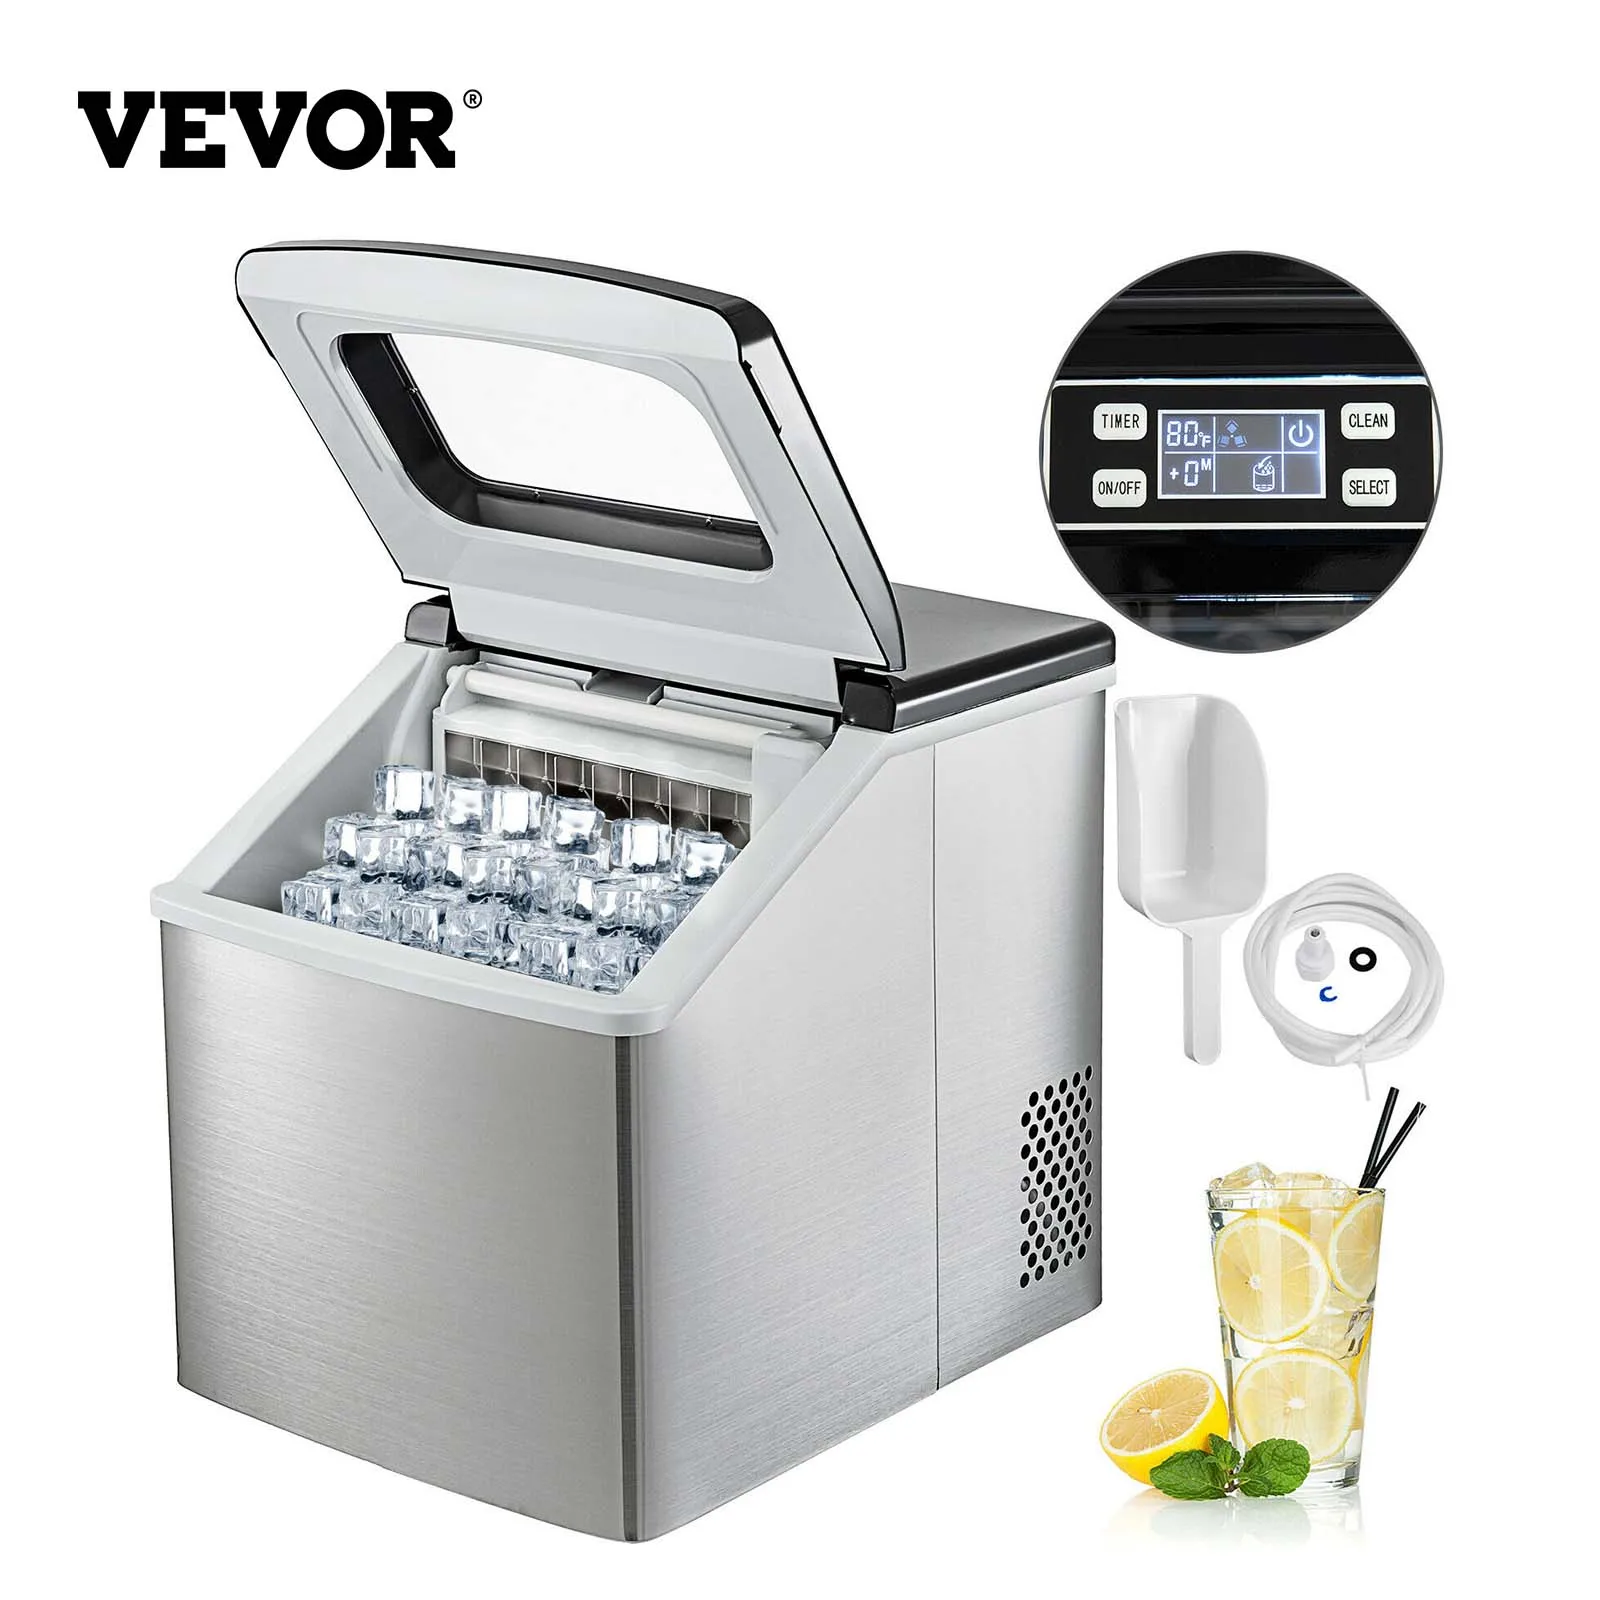 Ice Cube Maker Machine VEVOR 220V 18KG Ice Maker Countertop Ice Maker Compact Clear Ice Cubes for Kitchen Home Bars Stainless Steel 40LBS Ice Making Machine 